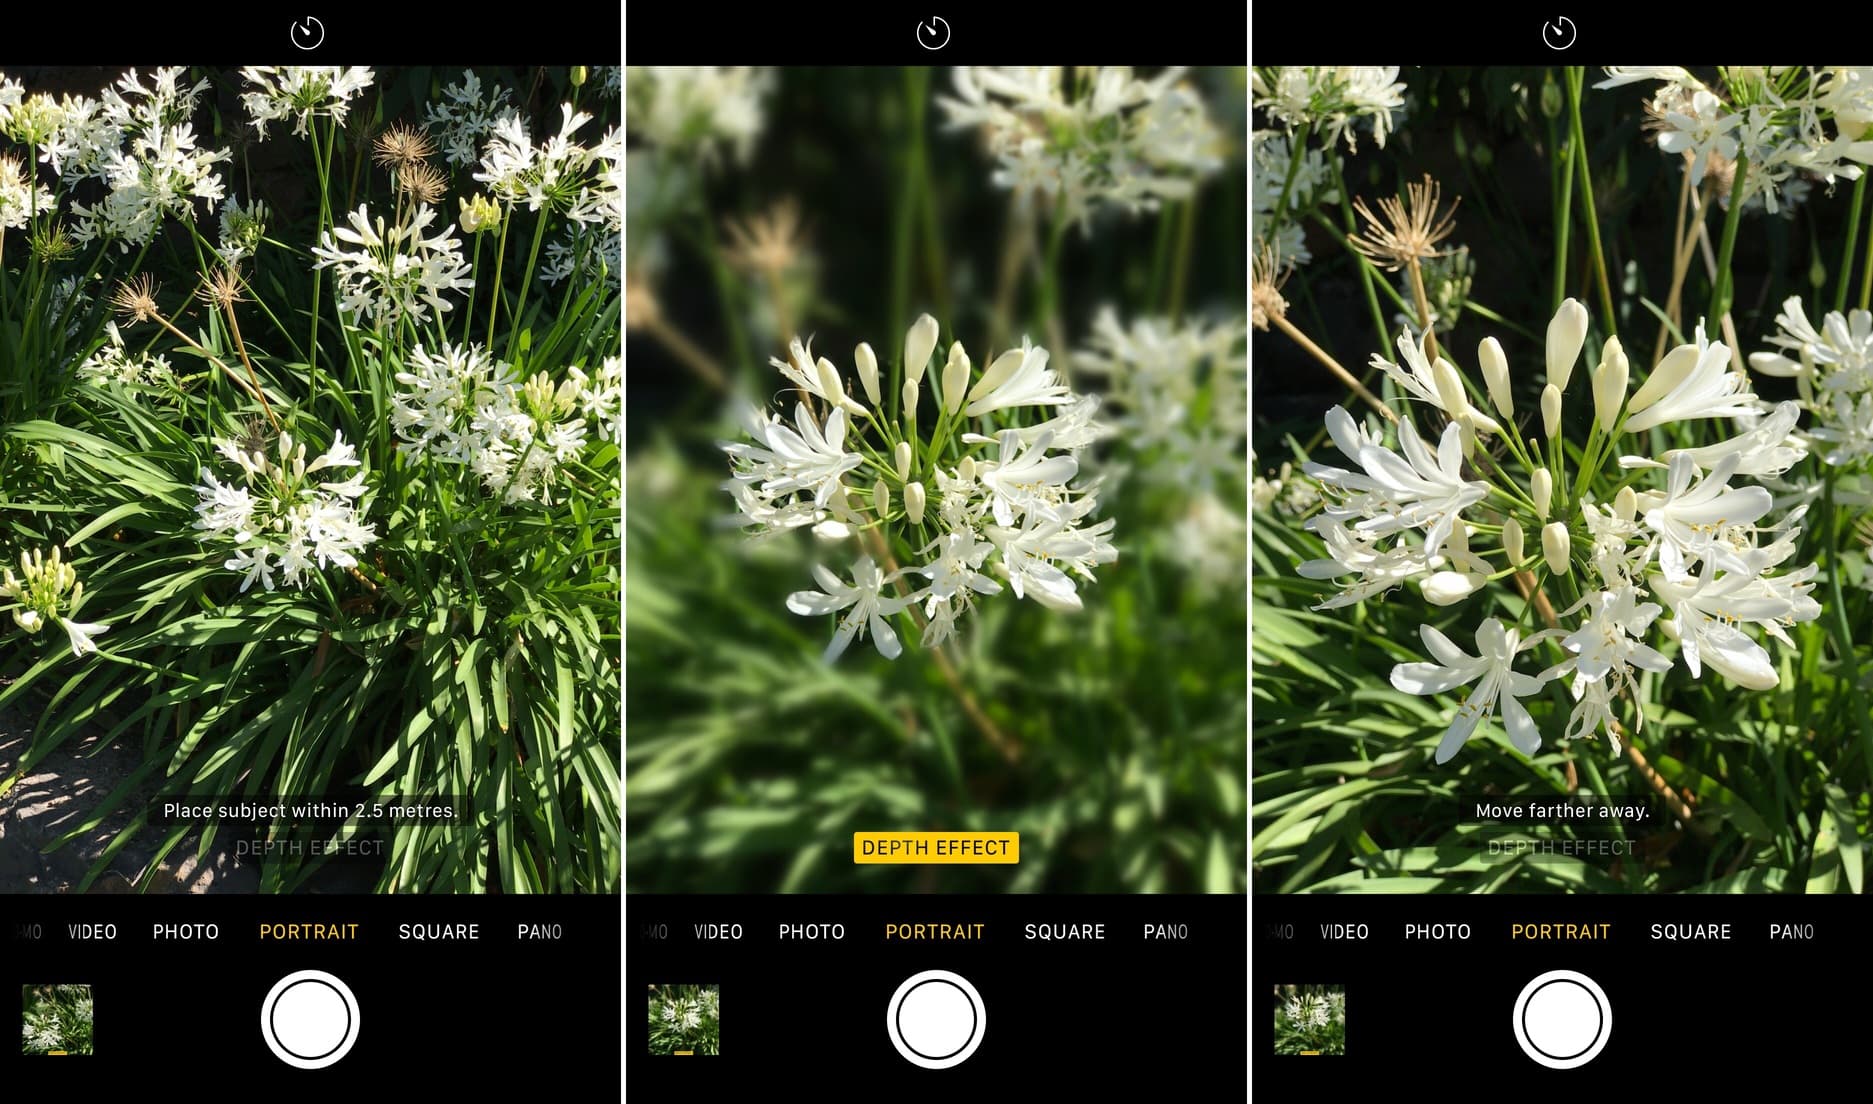 Follow the on-screen distance indicators when taking portrait mode photos on iPhone